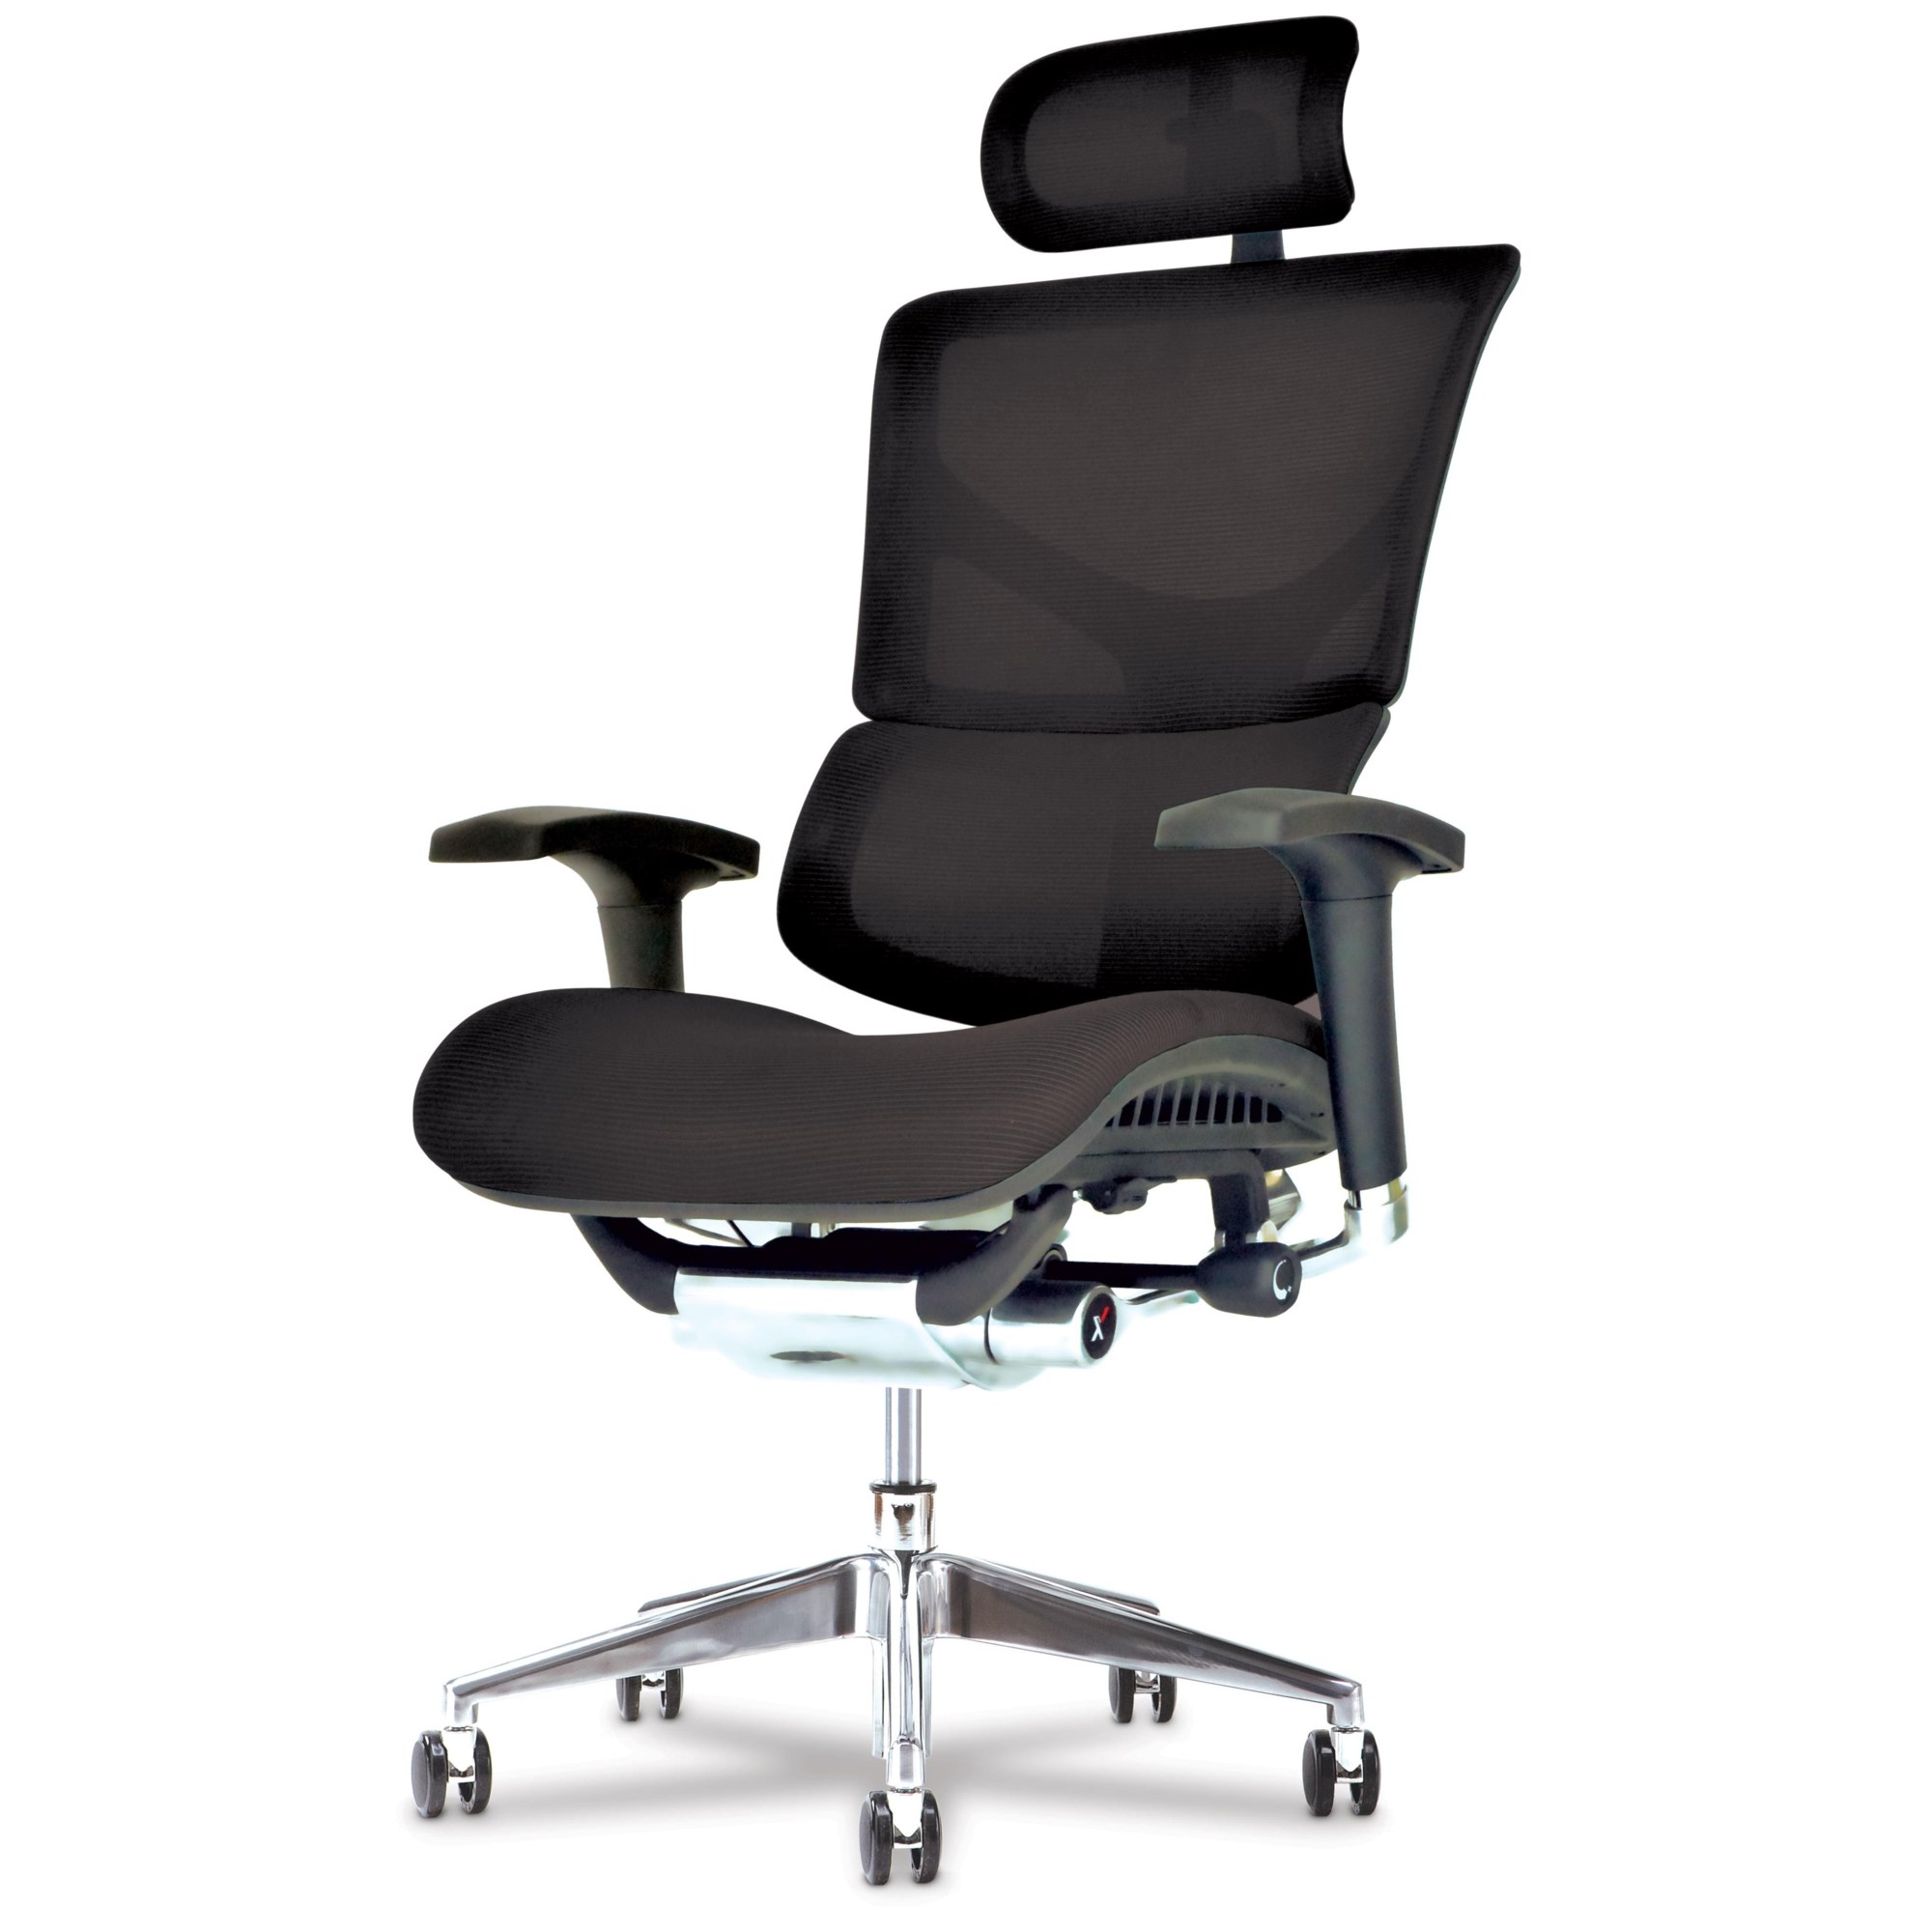 X4 Executive leather chair review